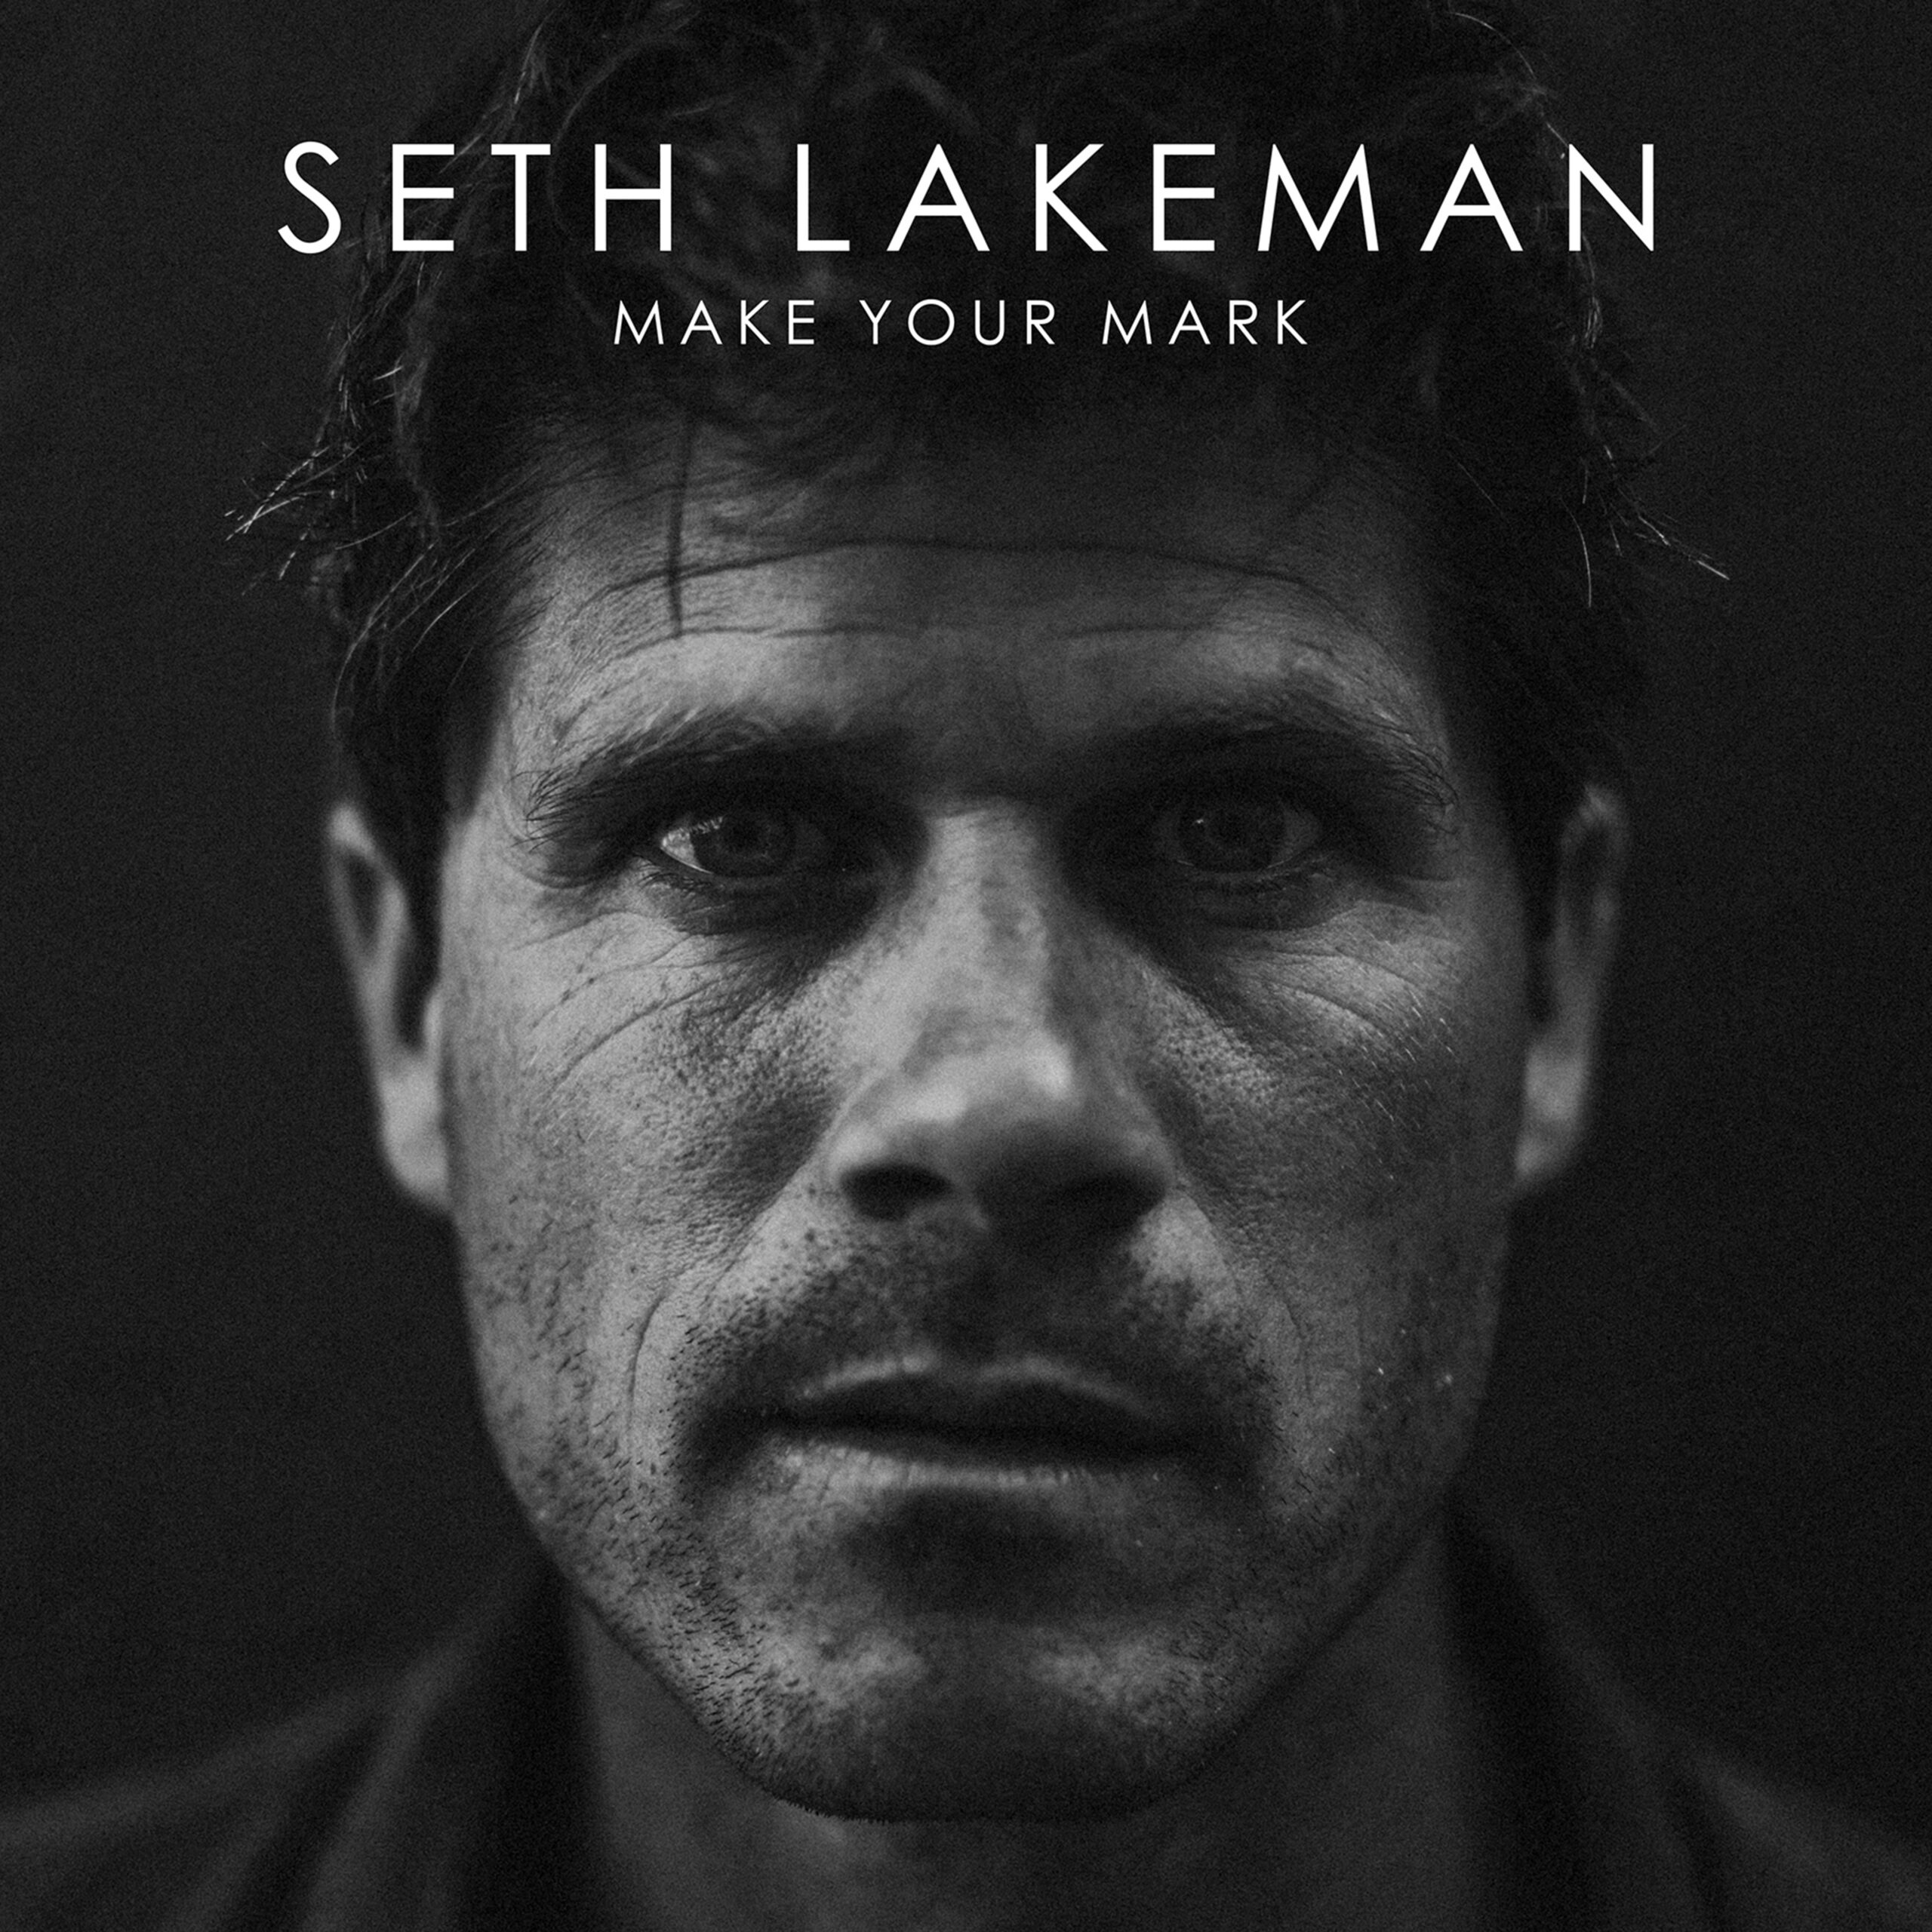 Seth Lakeman – Make Your Mark OUT NOW